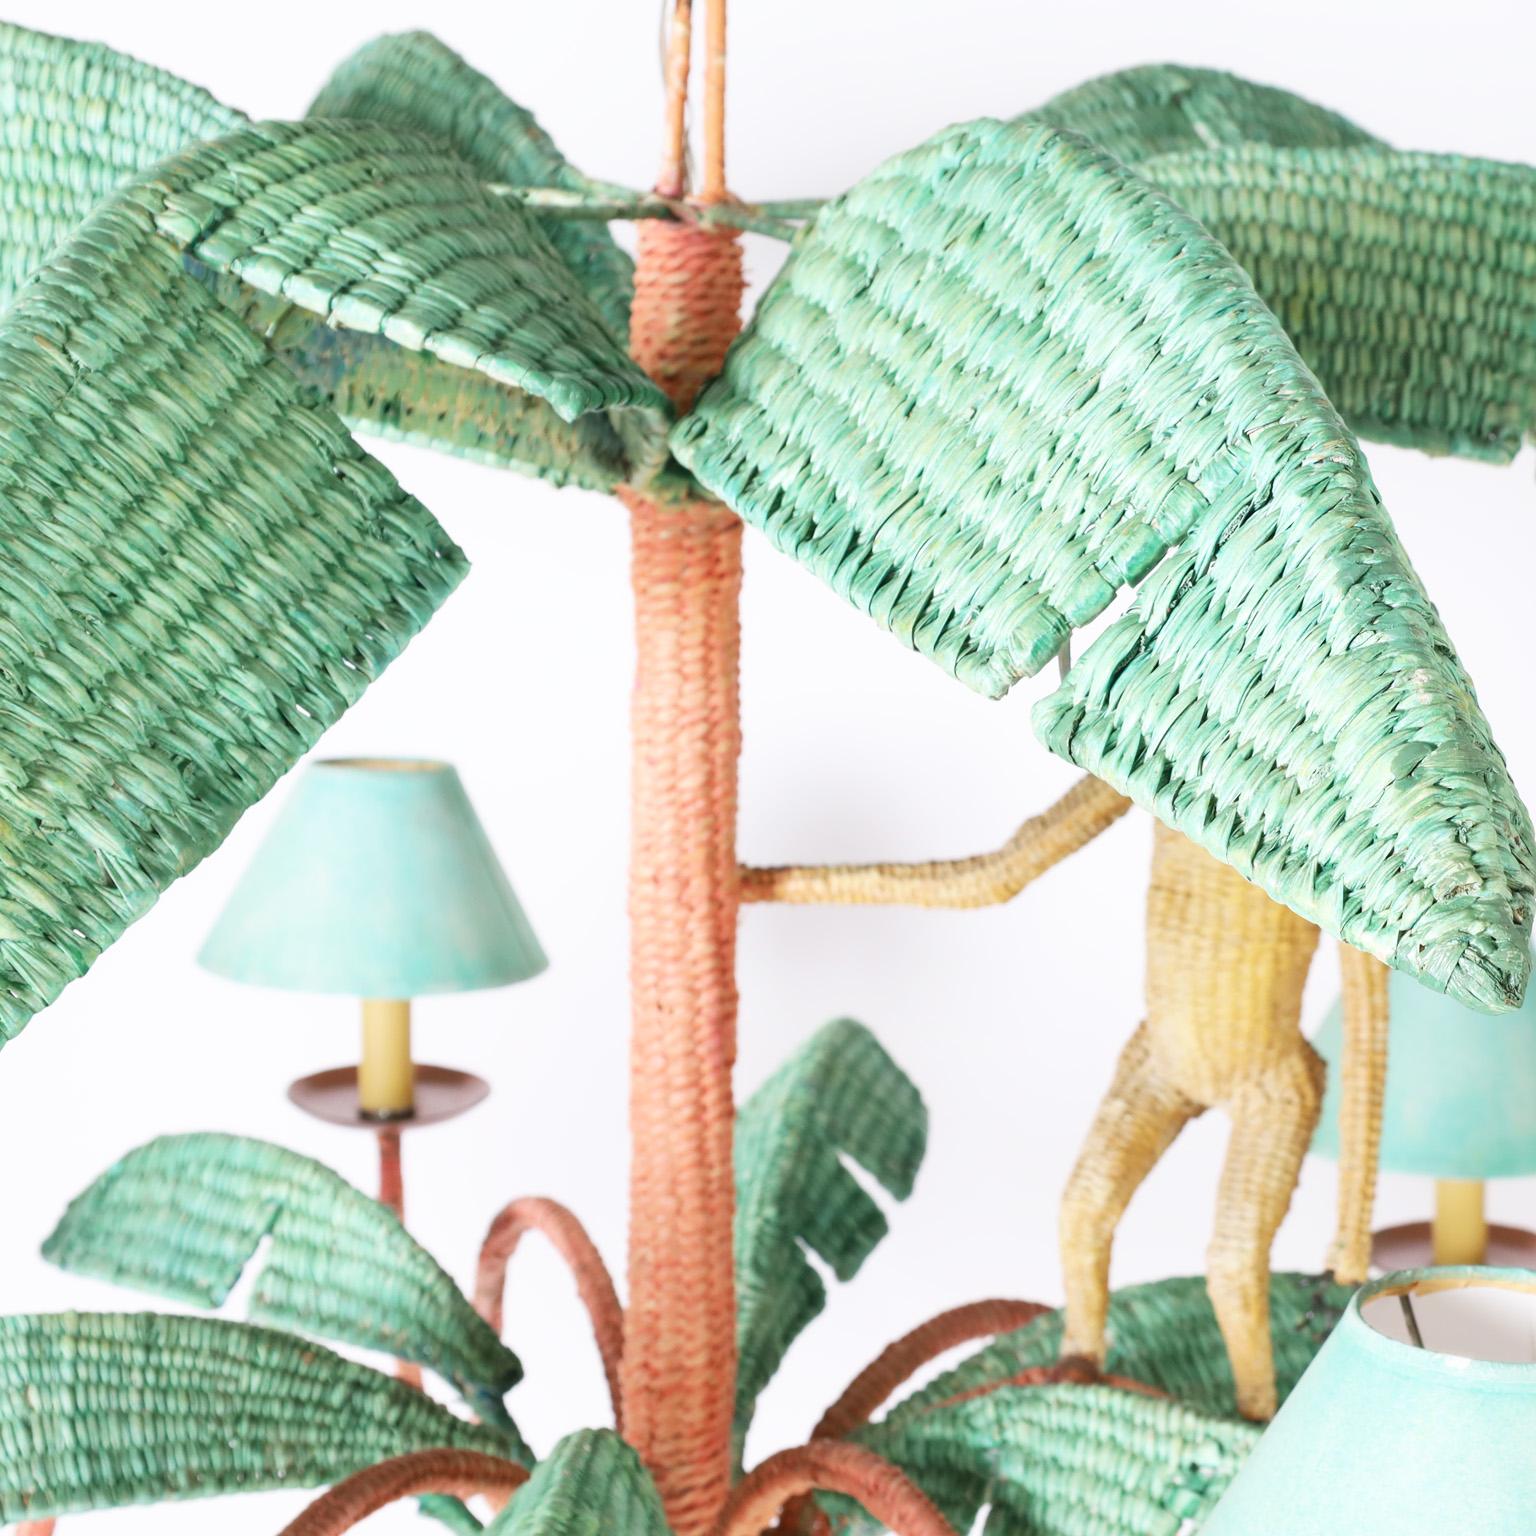 Whimsical vintage Mario Torres six light chandelier crafted with woven reed on a metal frame, painted in tropical colors with attached monkey and highlighted with copper hardware.